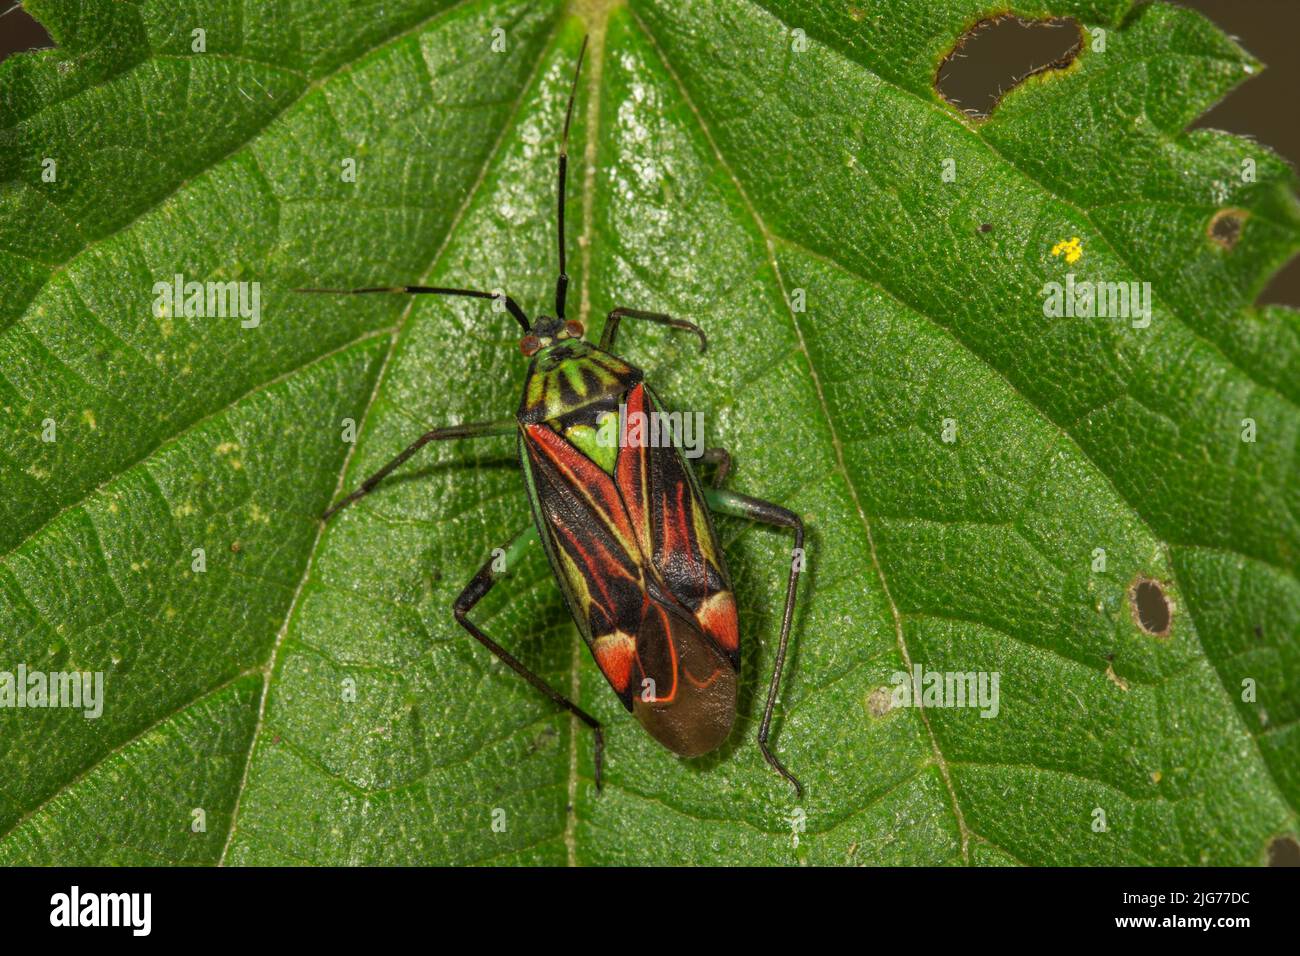 Soft bug (Actinonotus pulcher) on a leaf, Baden-Wuerttemberg, Germany Stock Photo